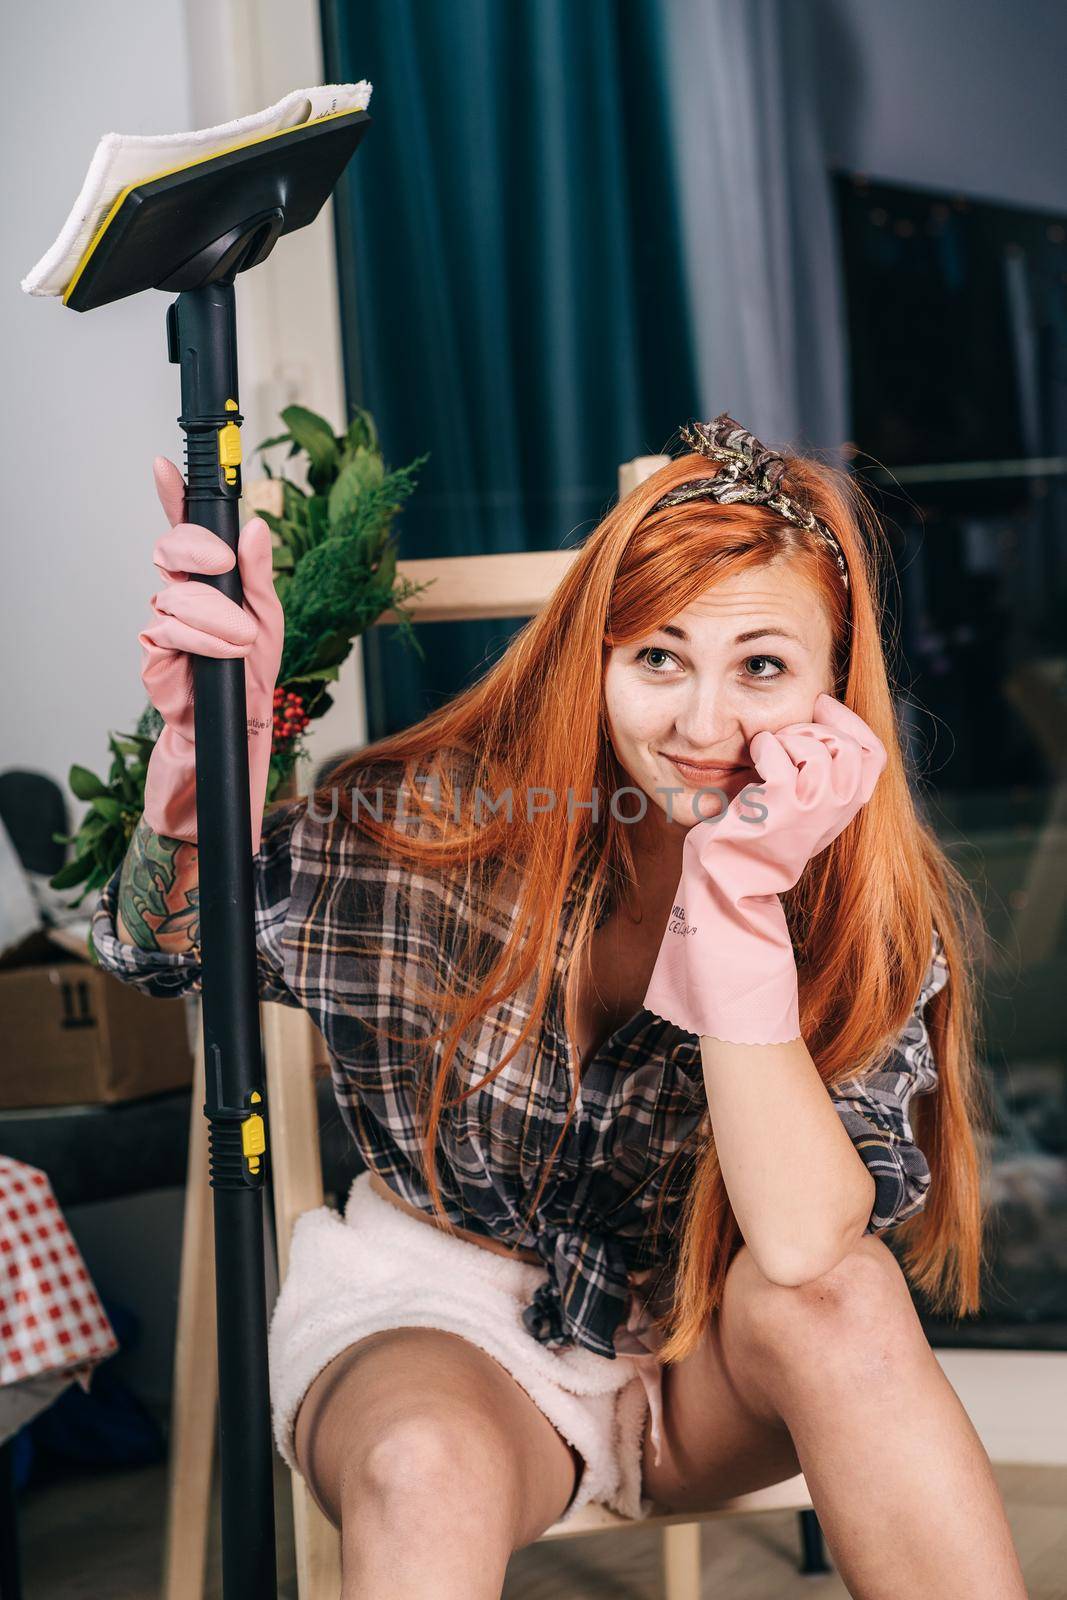 A young housewife in rubber gloves and a shirt holds a vacuum cleaner in her hands. Tired girl